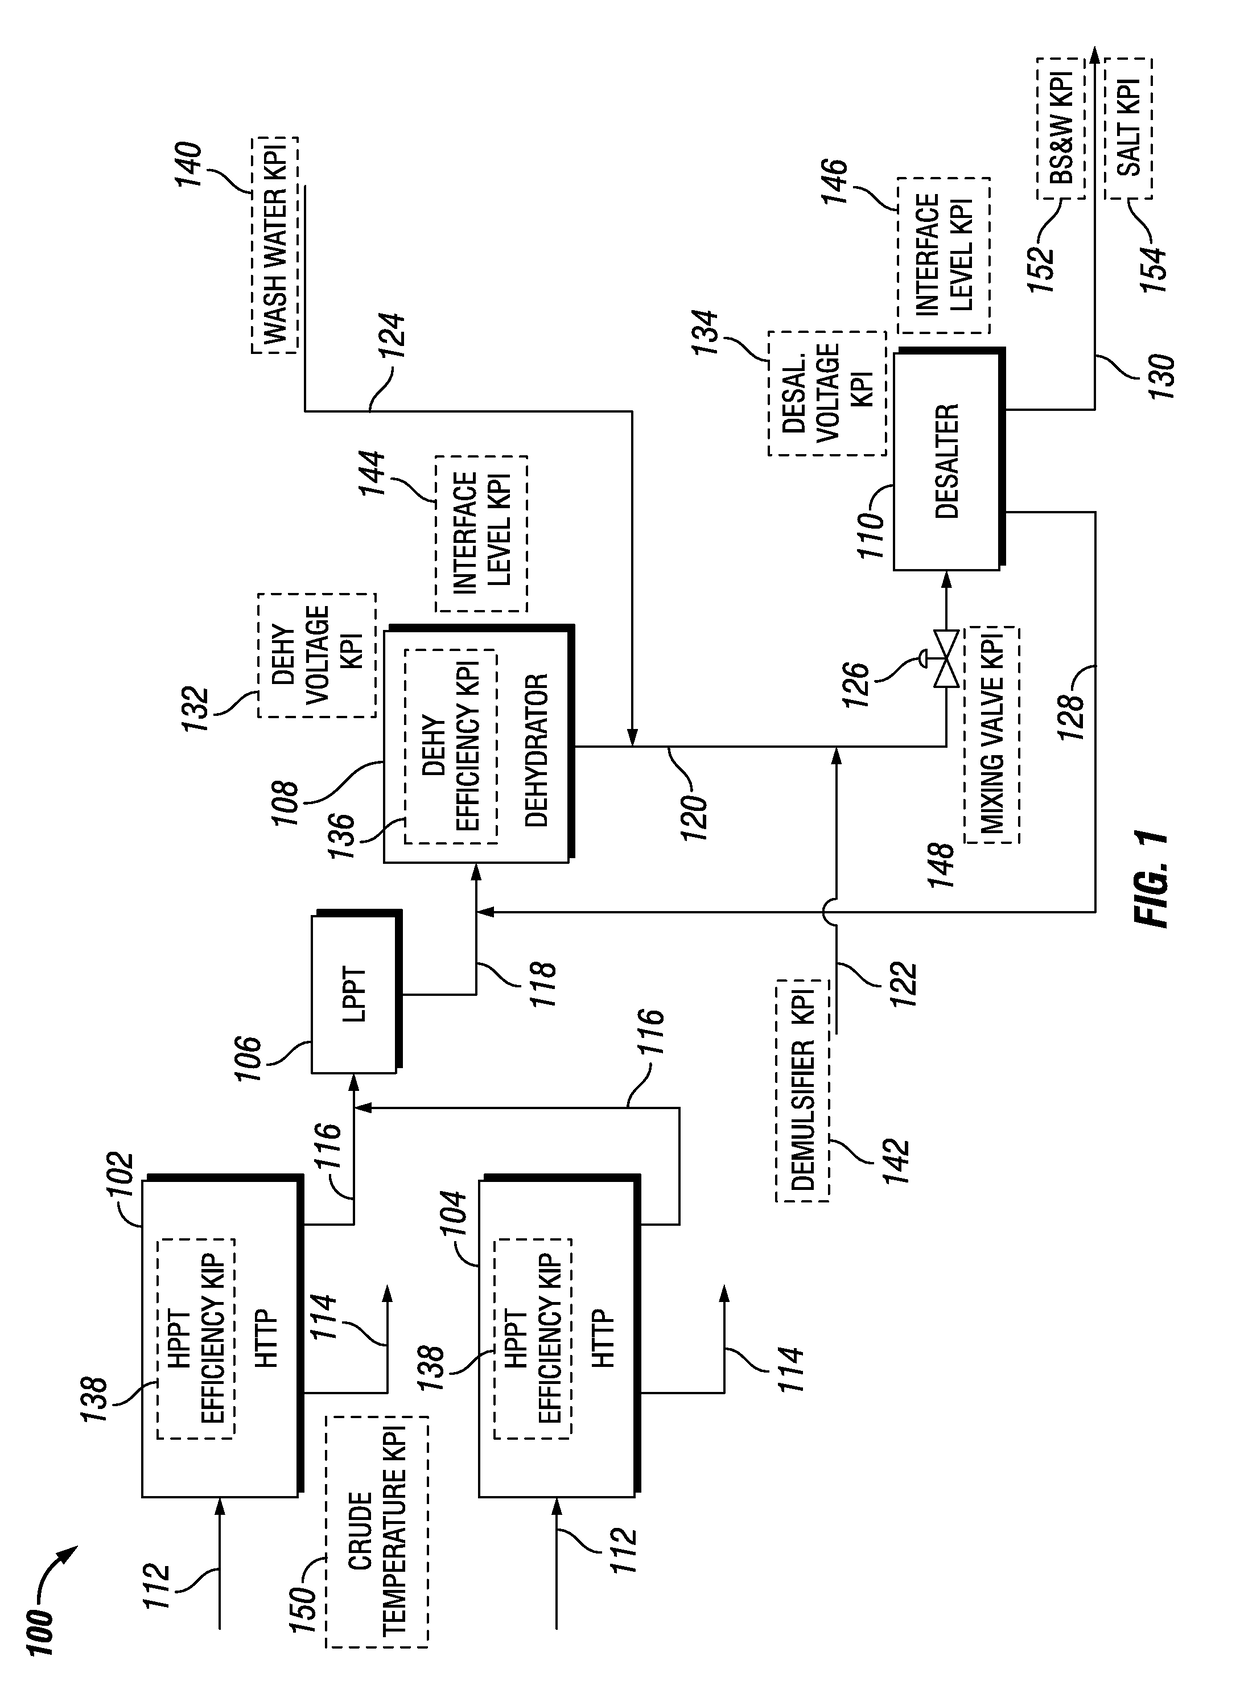 Methods and Systems for Proactively Monitoring Crude Quality Assurance